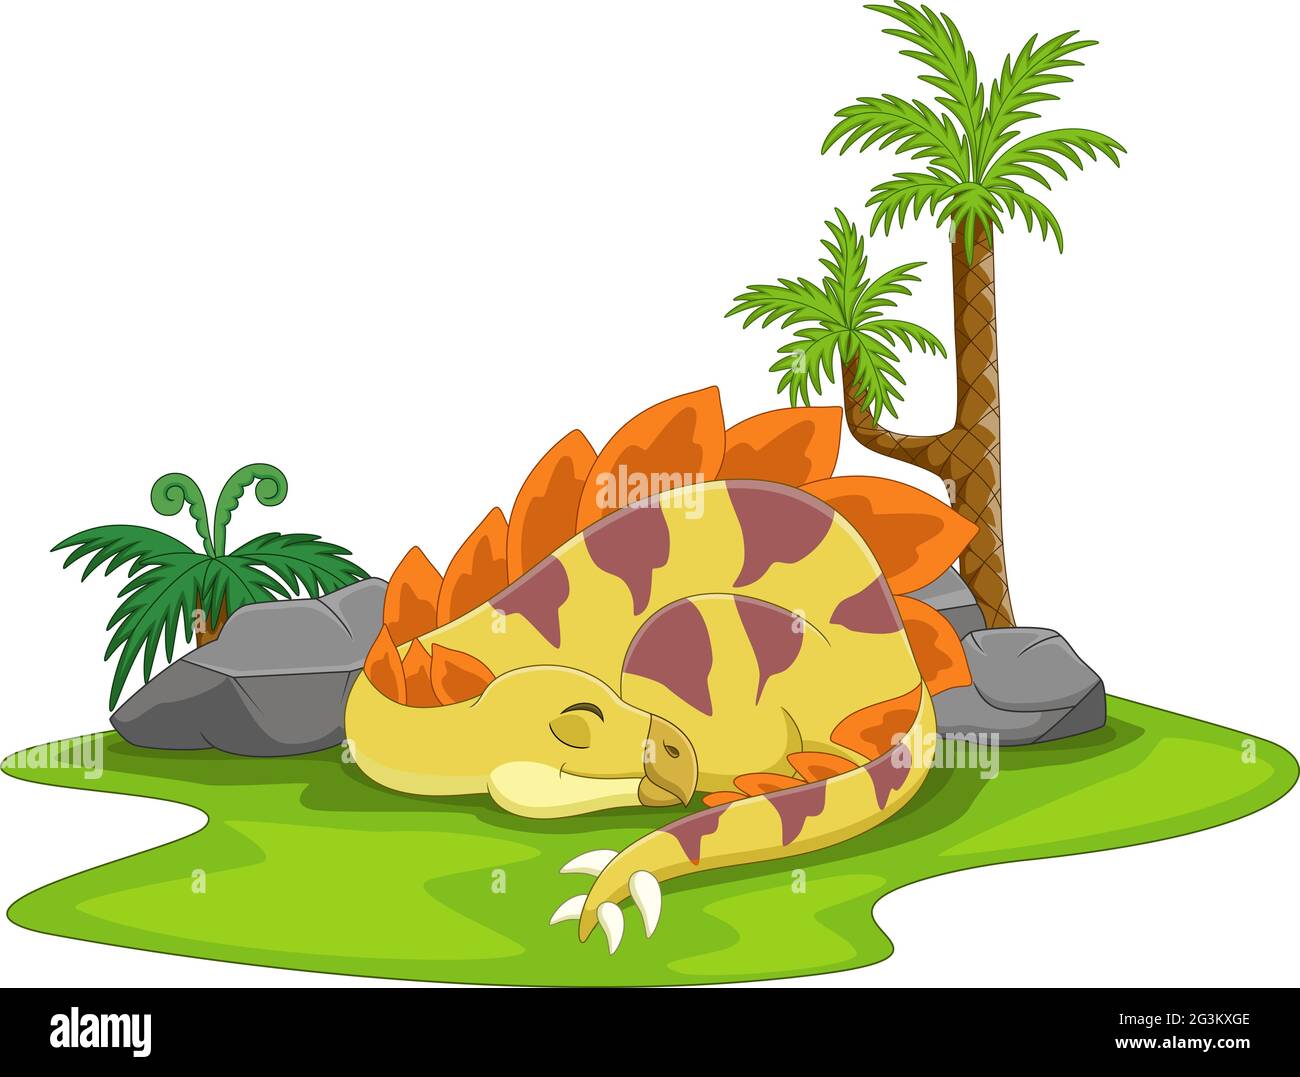 Sleeping monster Stock Vector Images - Alamy